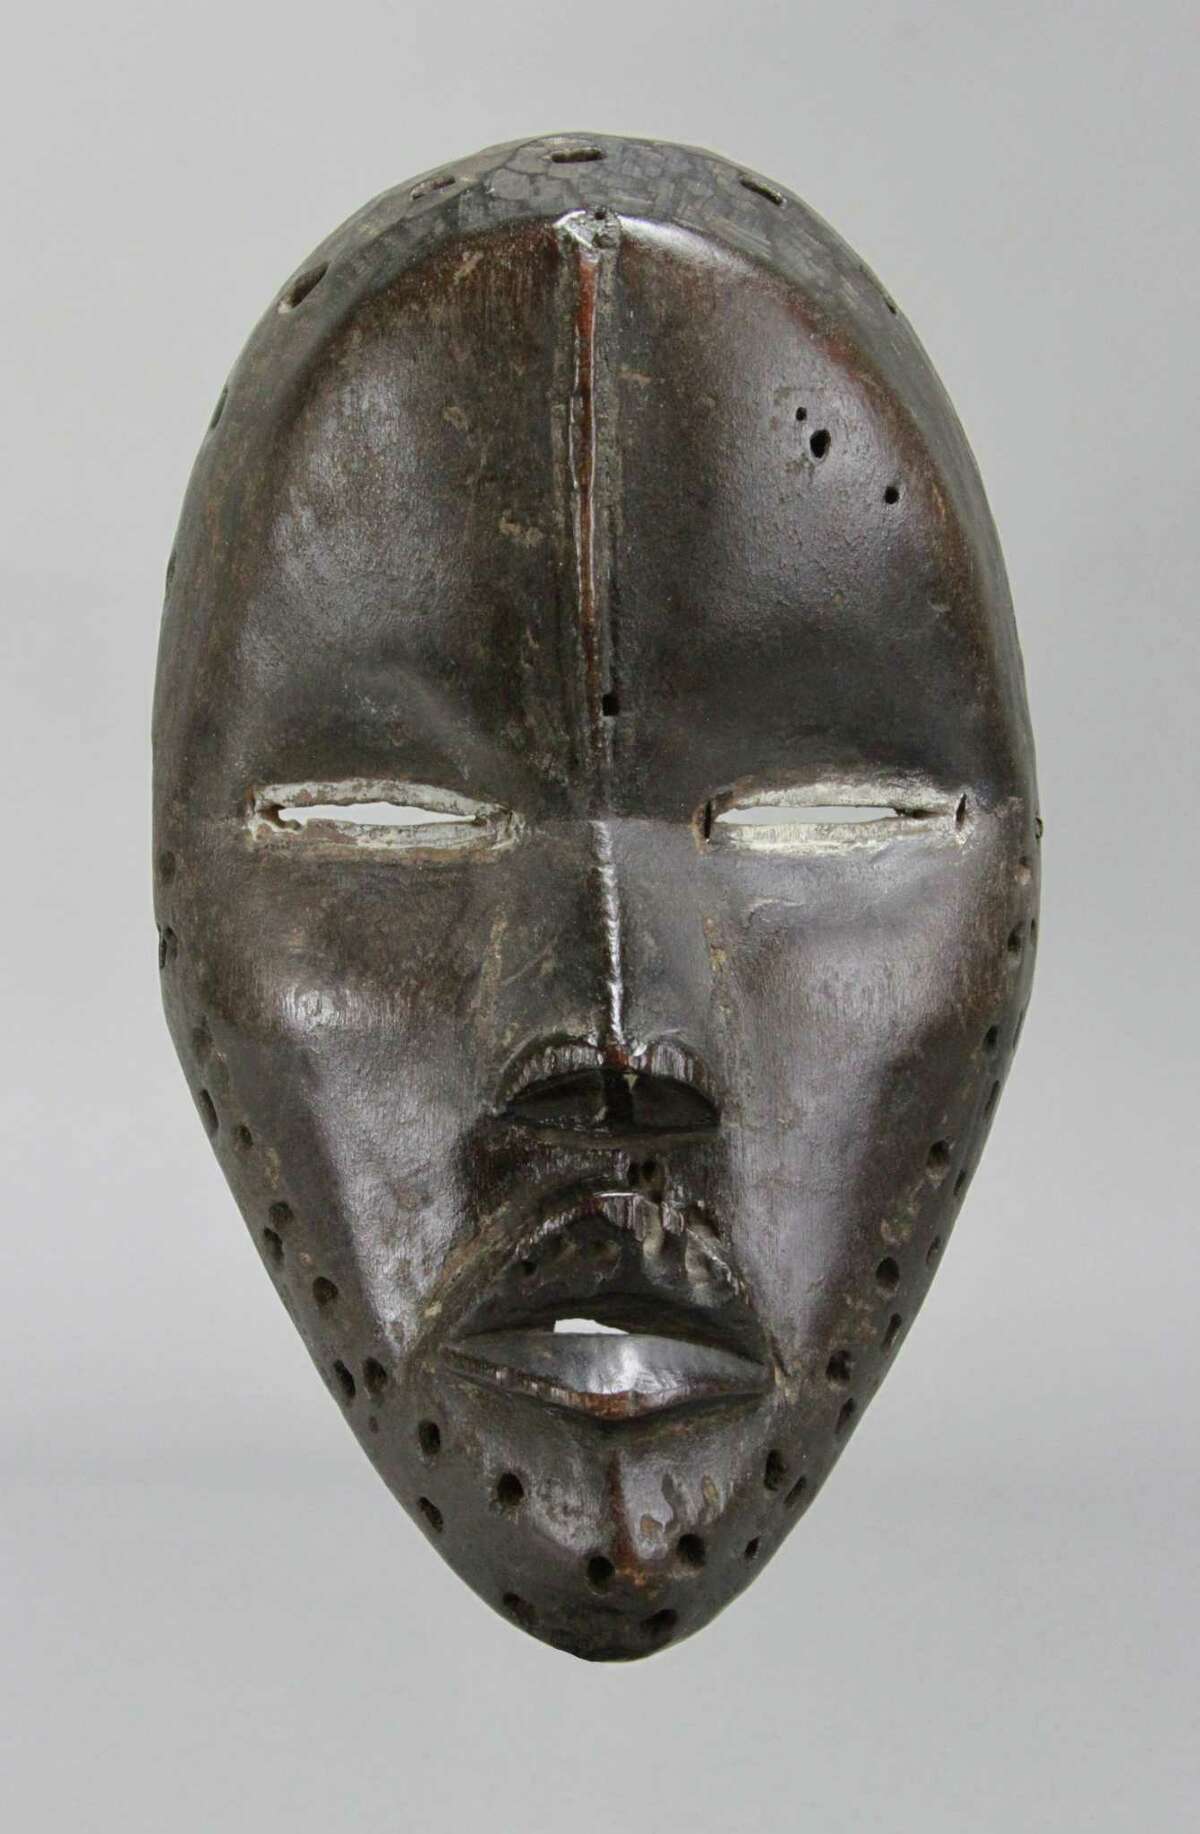 This Deangle mask of the Dan, or Gio, people of Liberia will be among the pieces on display in "Liberia, 1931-33: The Collections of Alfred J. Tulk," a show opening September 14, 2018, at the Fairfield University Art Museum. The show teams objects collected by the late artist during a visit to the African nation during the early 1930s, as well as his artwork. A longtime Fairfield and New Haven counties resident, Tulk died in 1988. Private collection. FIG 1: Mask (Deangle). Dan/Gio, Liberia. Wood, kaolin. 8 inches. Private collection.